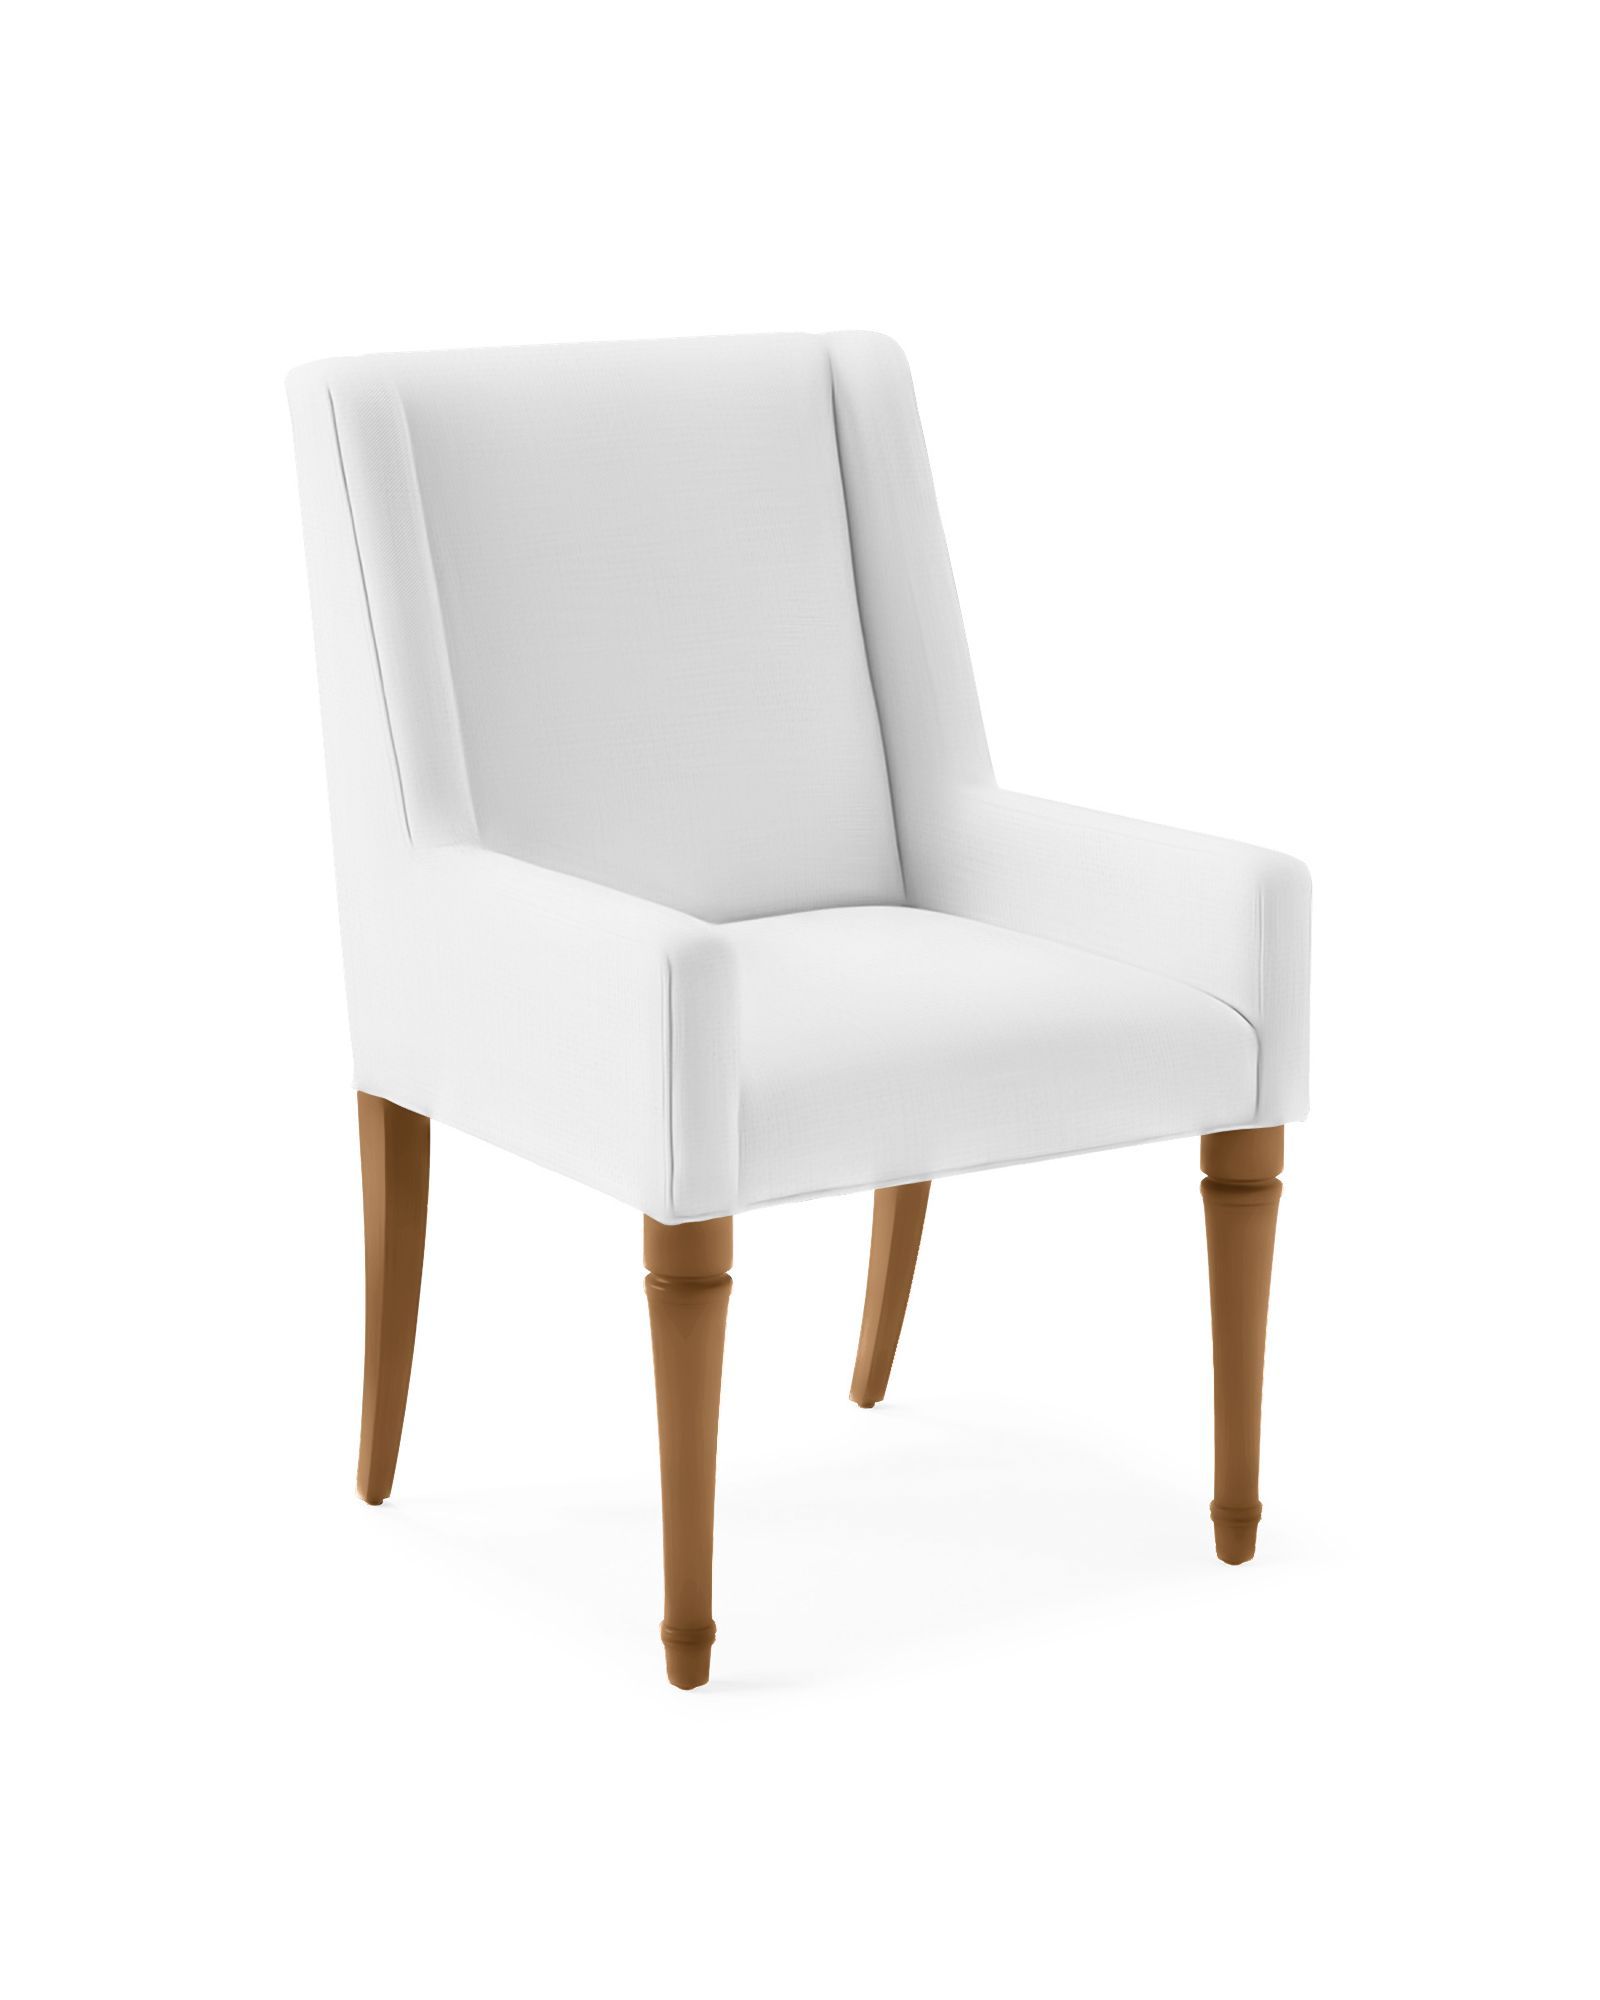 Eastgate Dining Chair | Serena and Lily